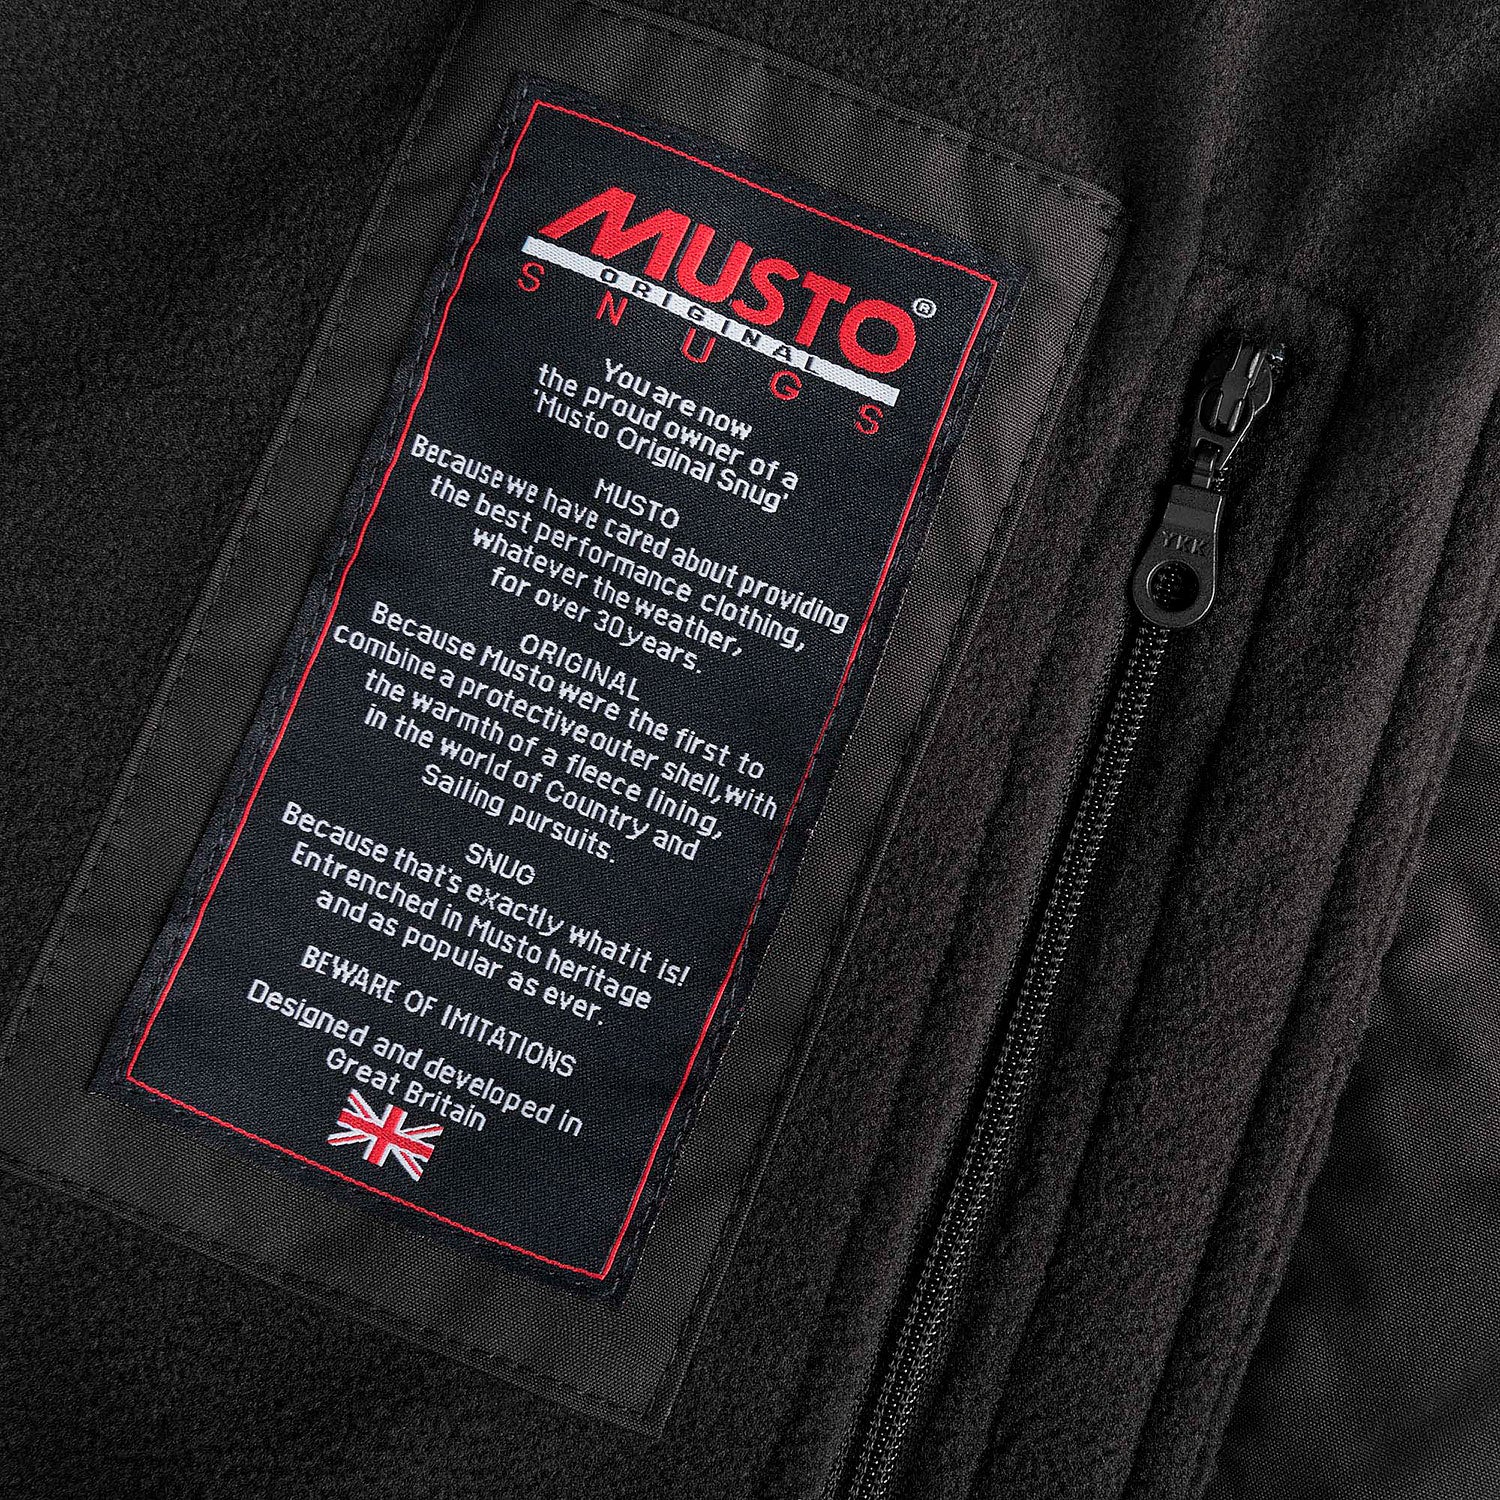 You are now the proud owner of a musto original snug